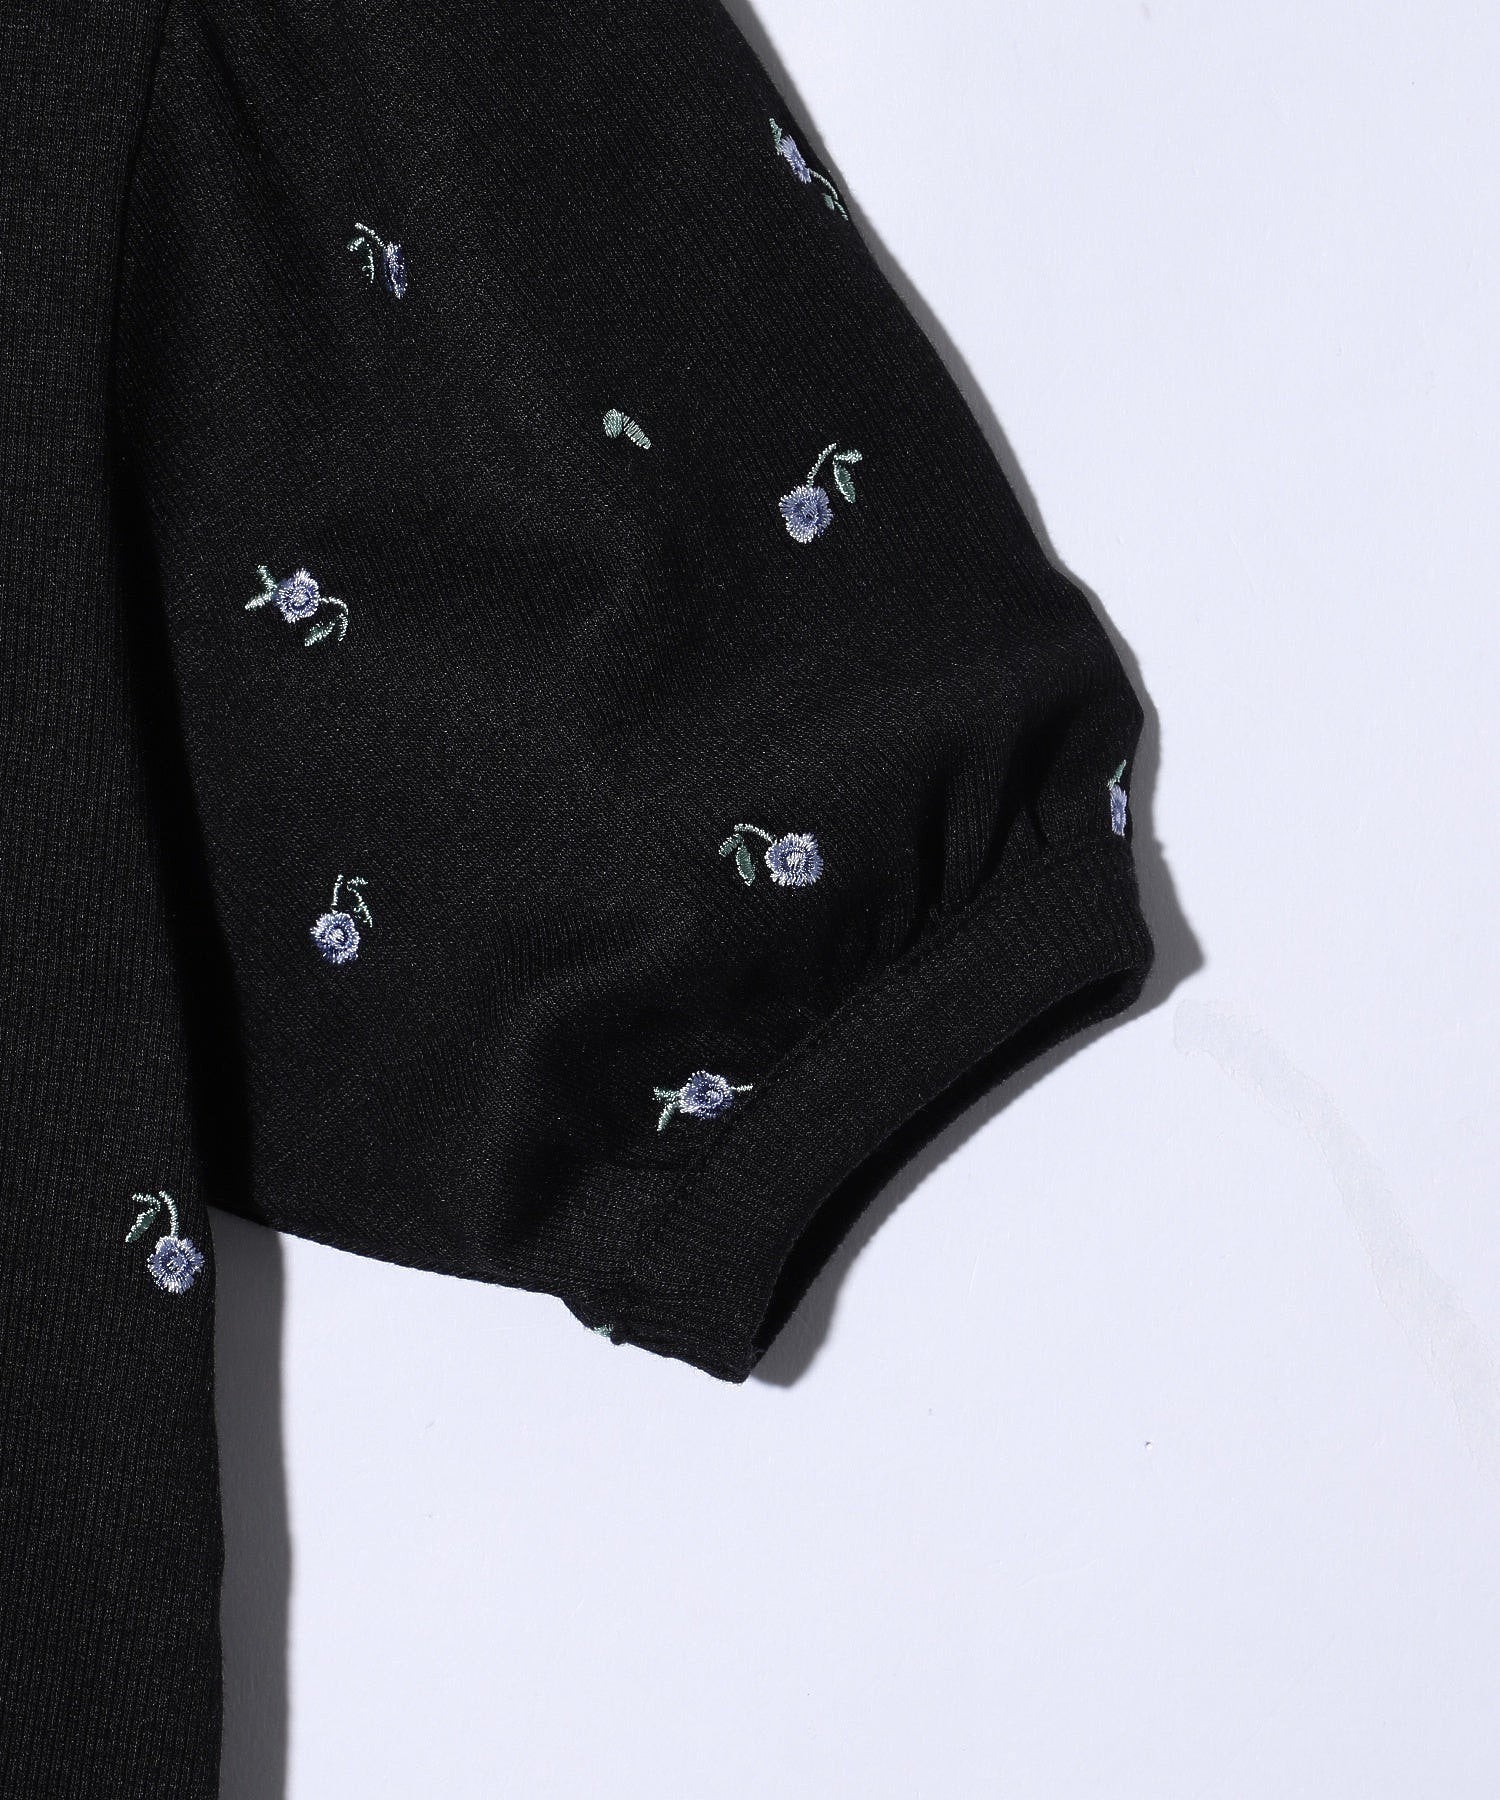 FLOWER EMBROIDERY SHIRRING S/S TOP MILKFED.